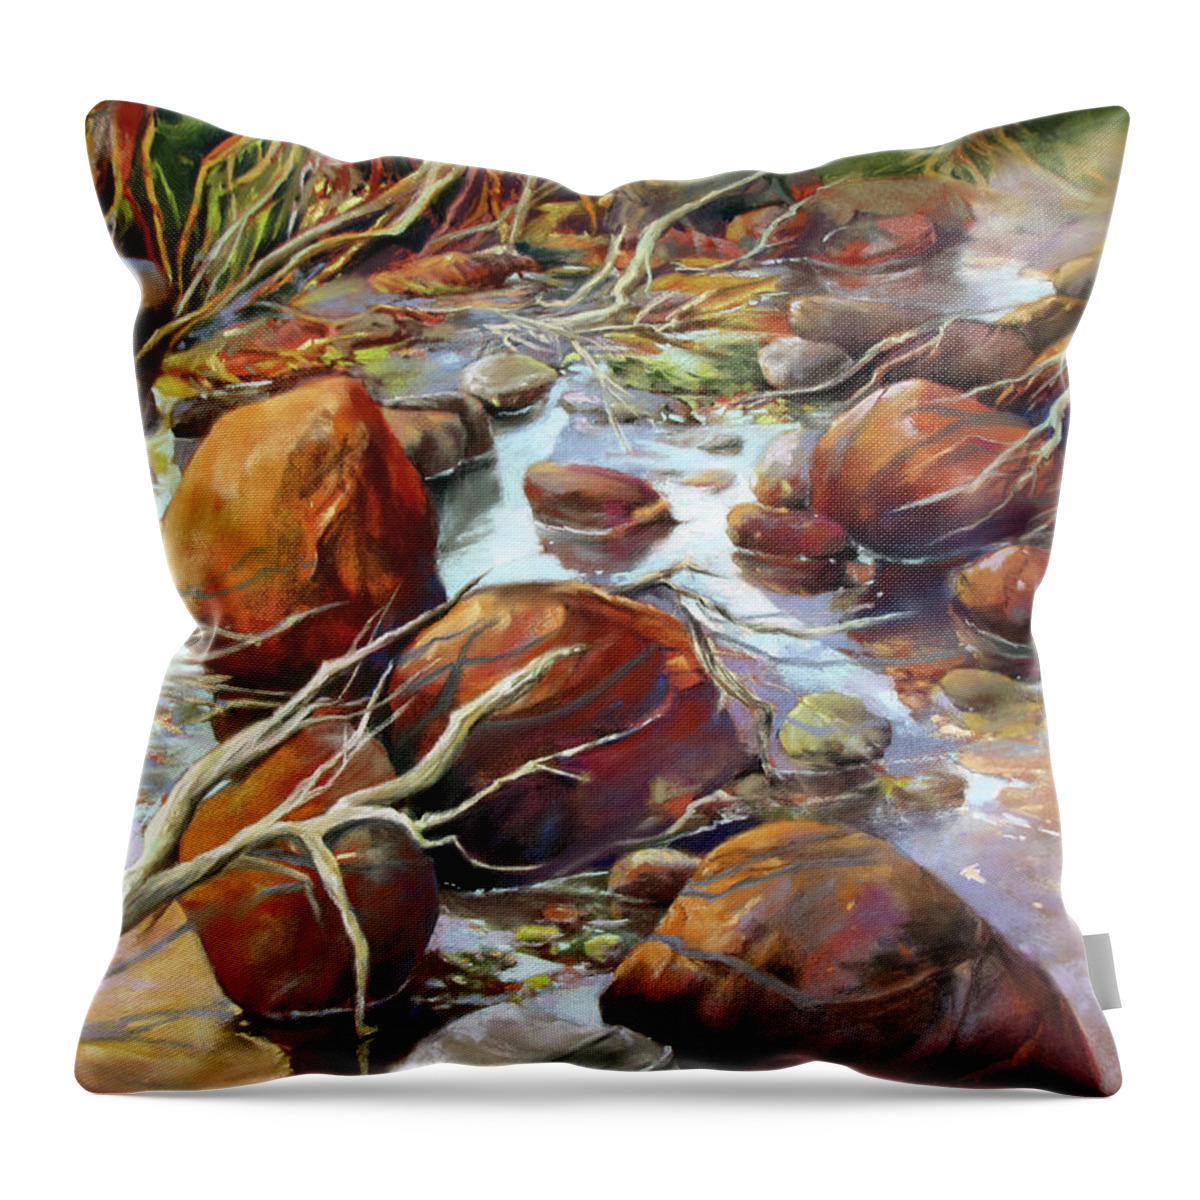 Seascape Throw Pillow featuring the painting Backwater Sticks and Stones by Rae Andrews